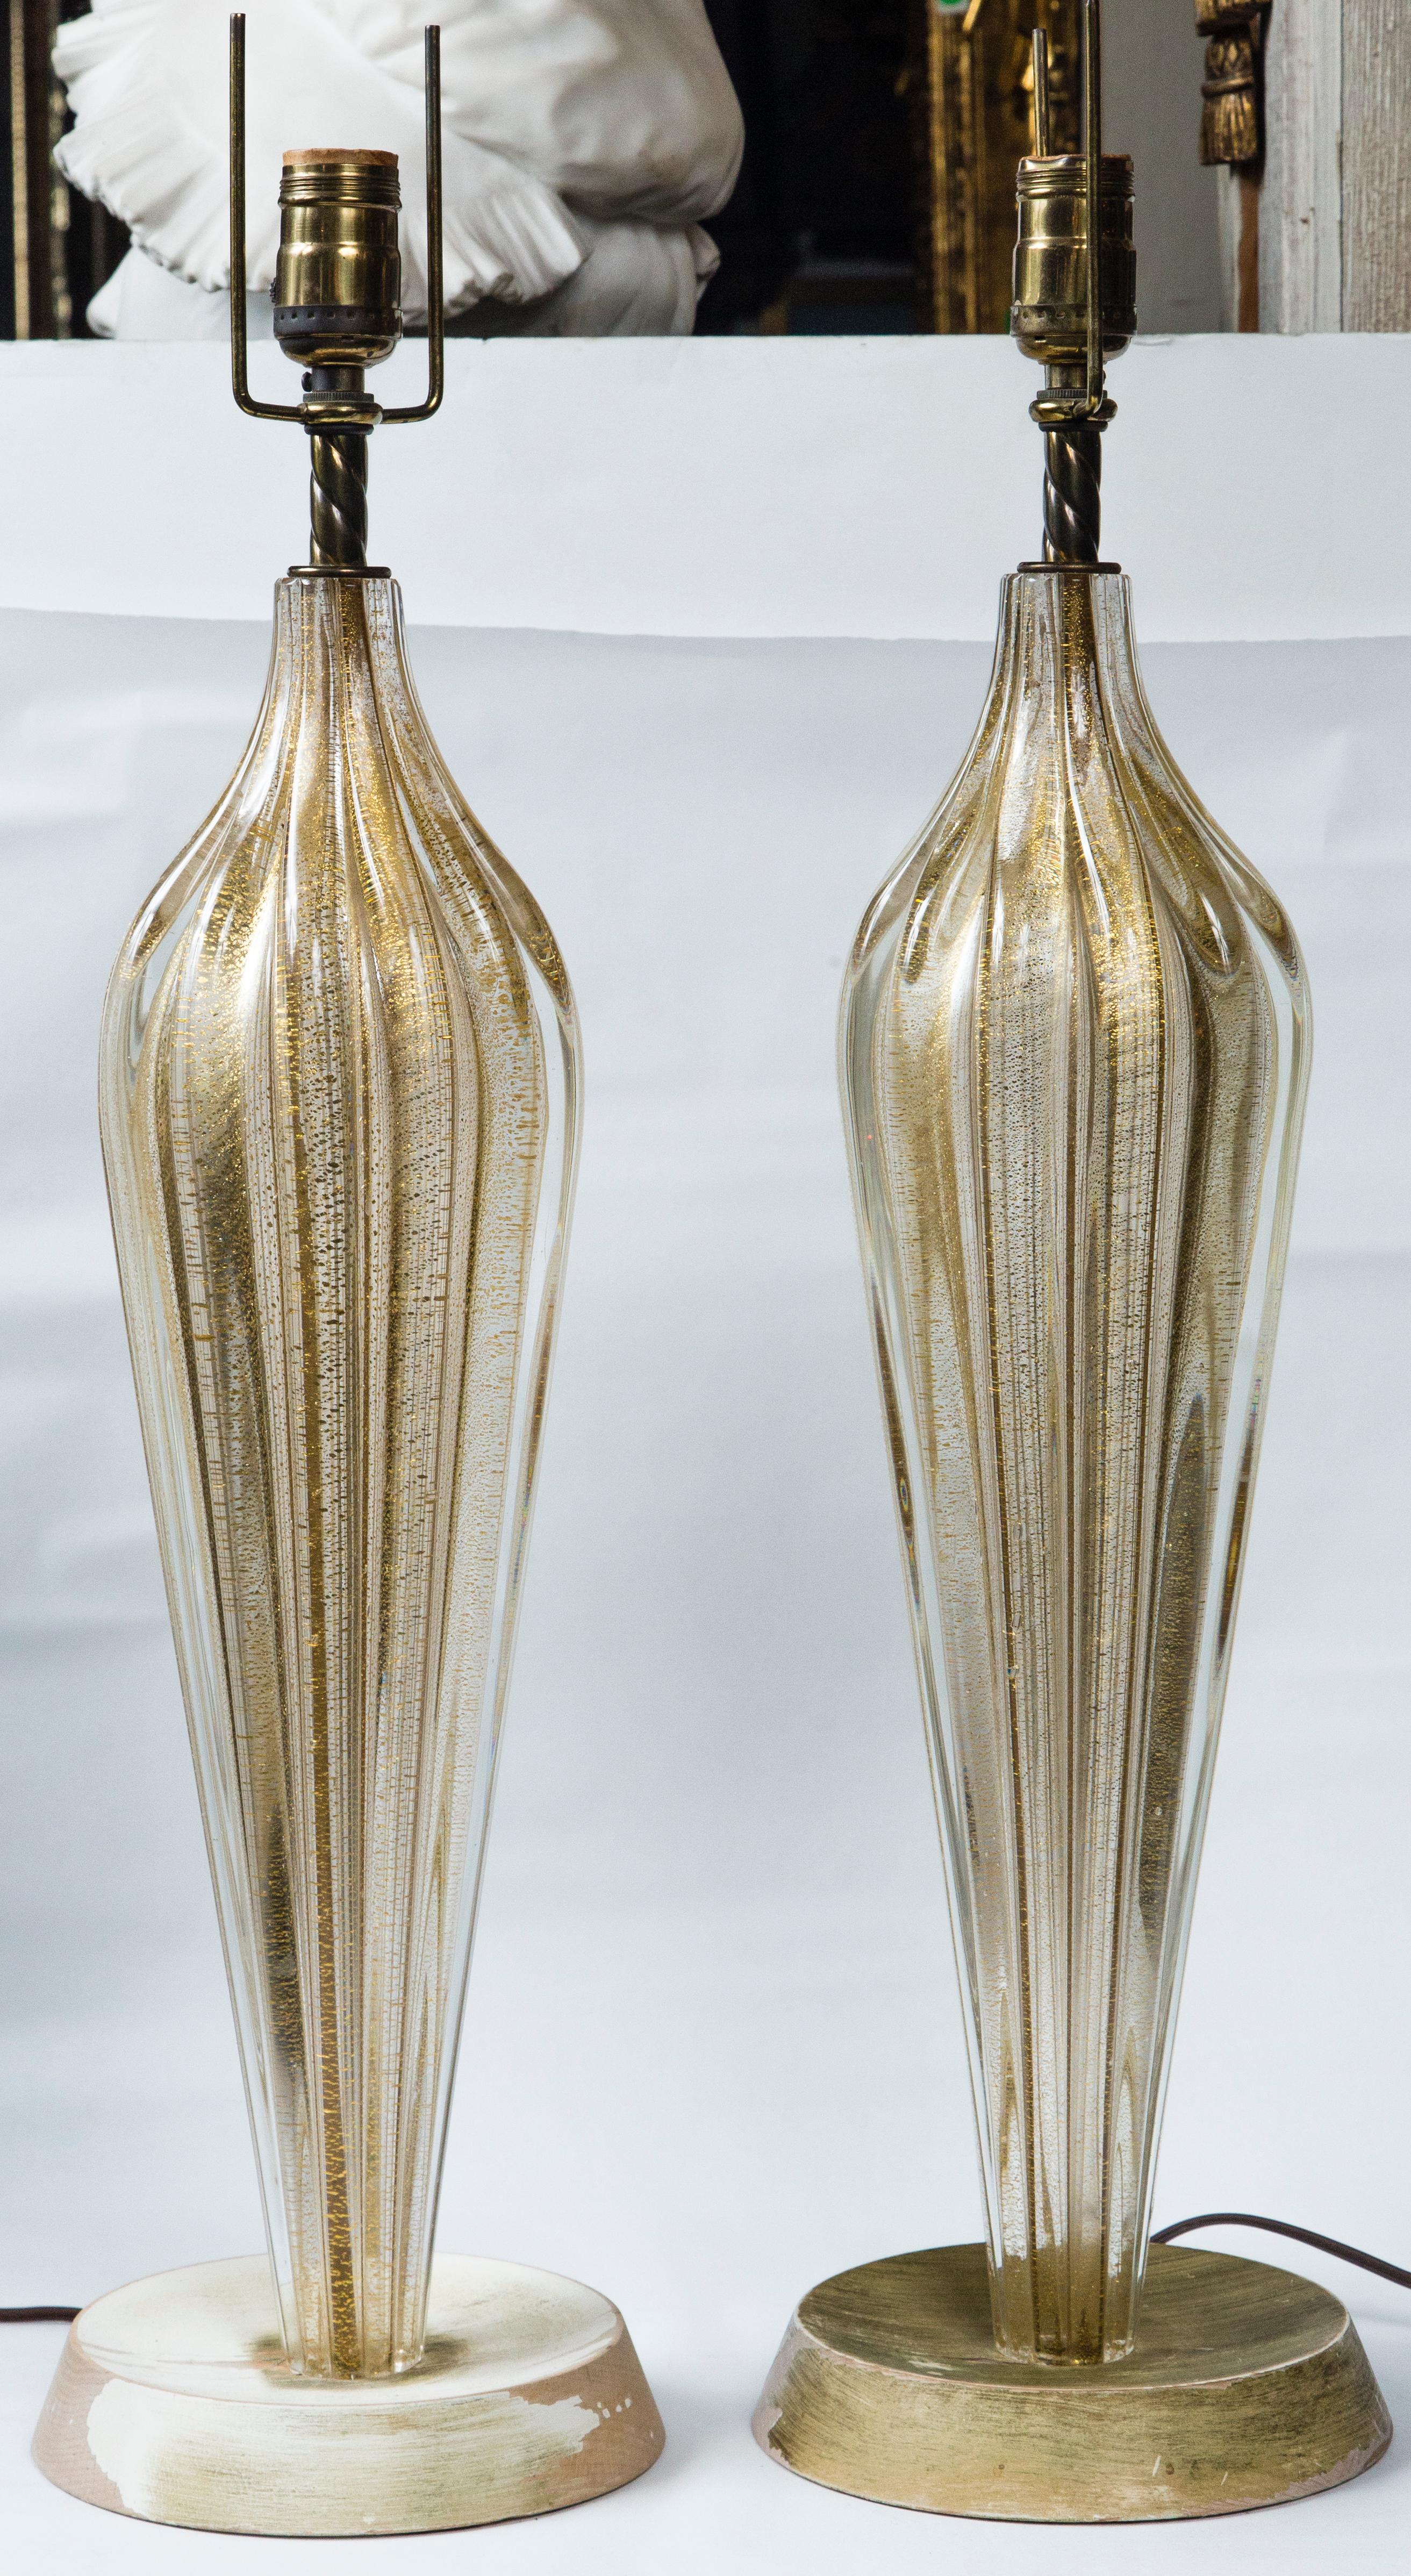 Of gold and clear thick glass in long inverted teardrop shape, ribbed. The gold appears to be gold colored 